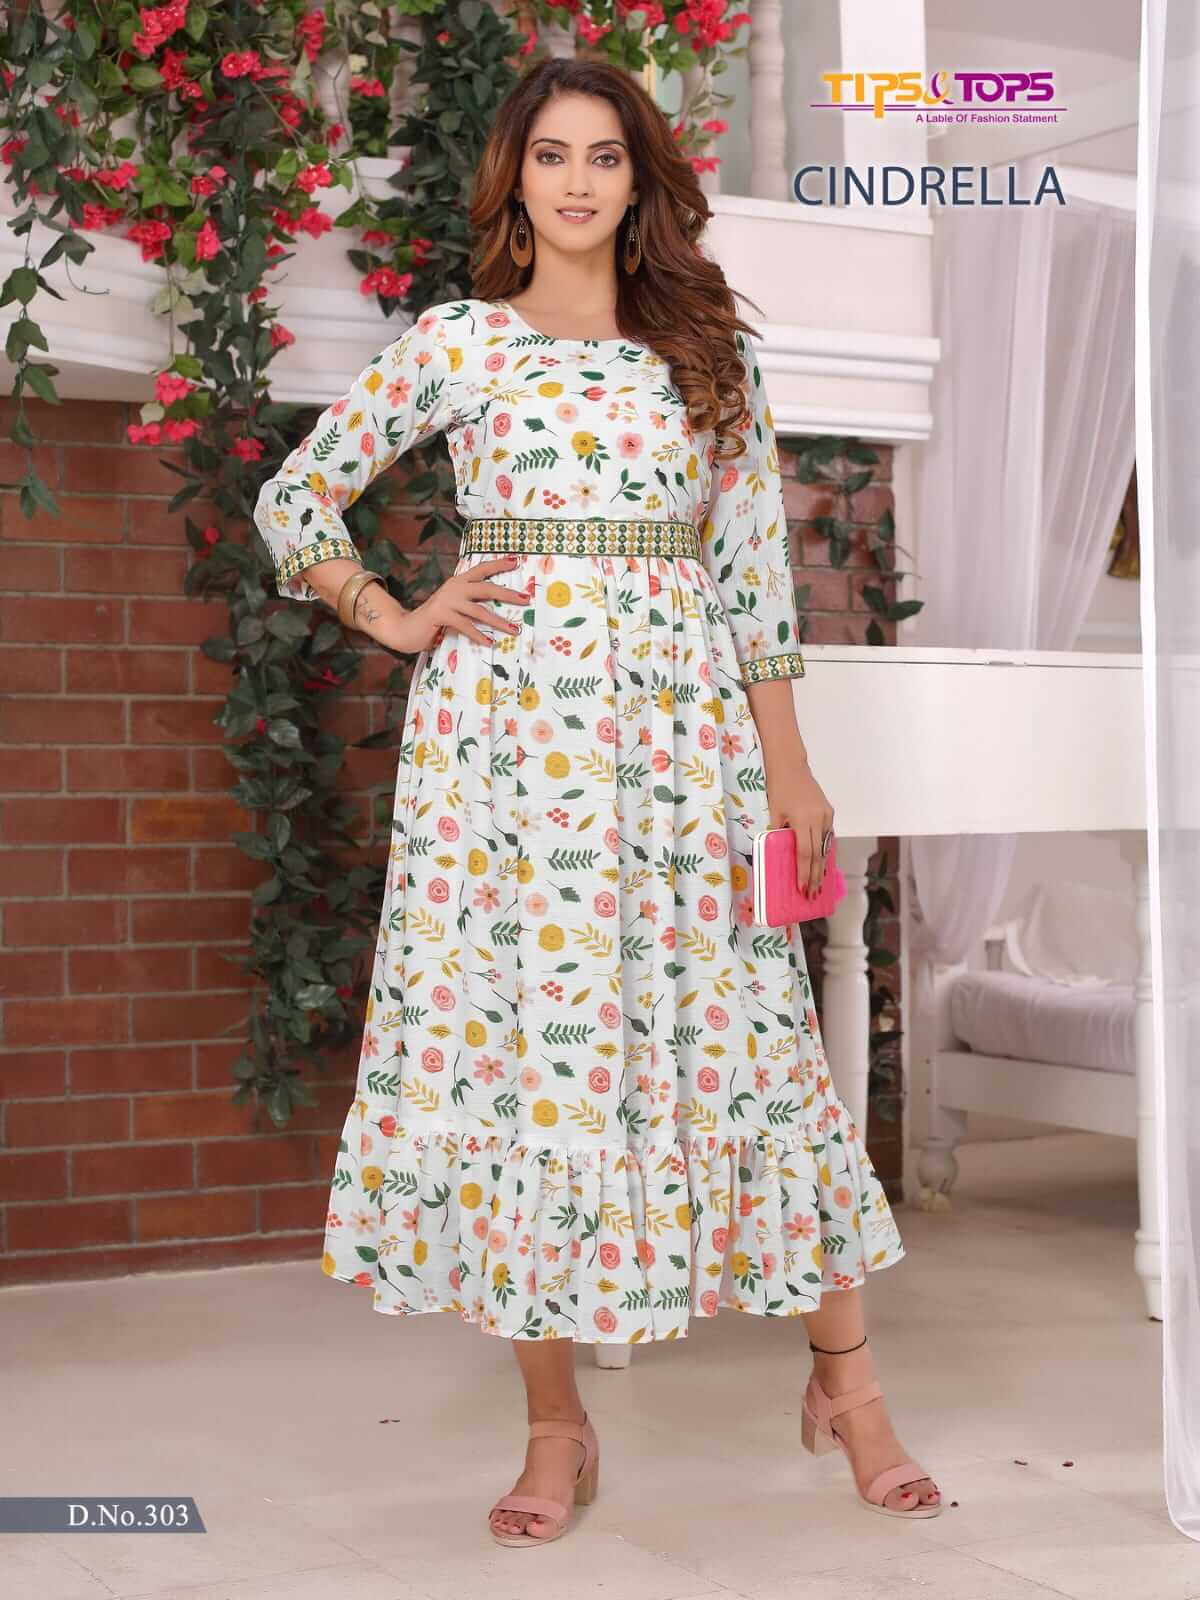 Tips And Tops Cindrella Vol 3 One Piece Dress Catalog collection 2